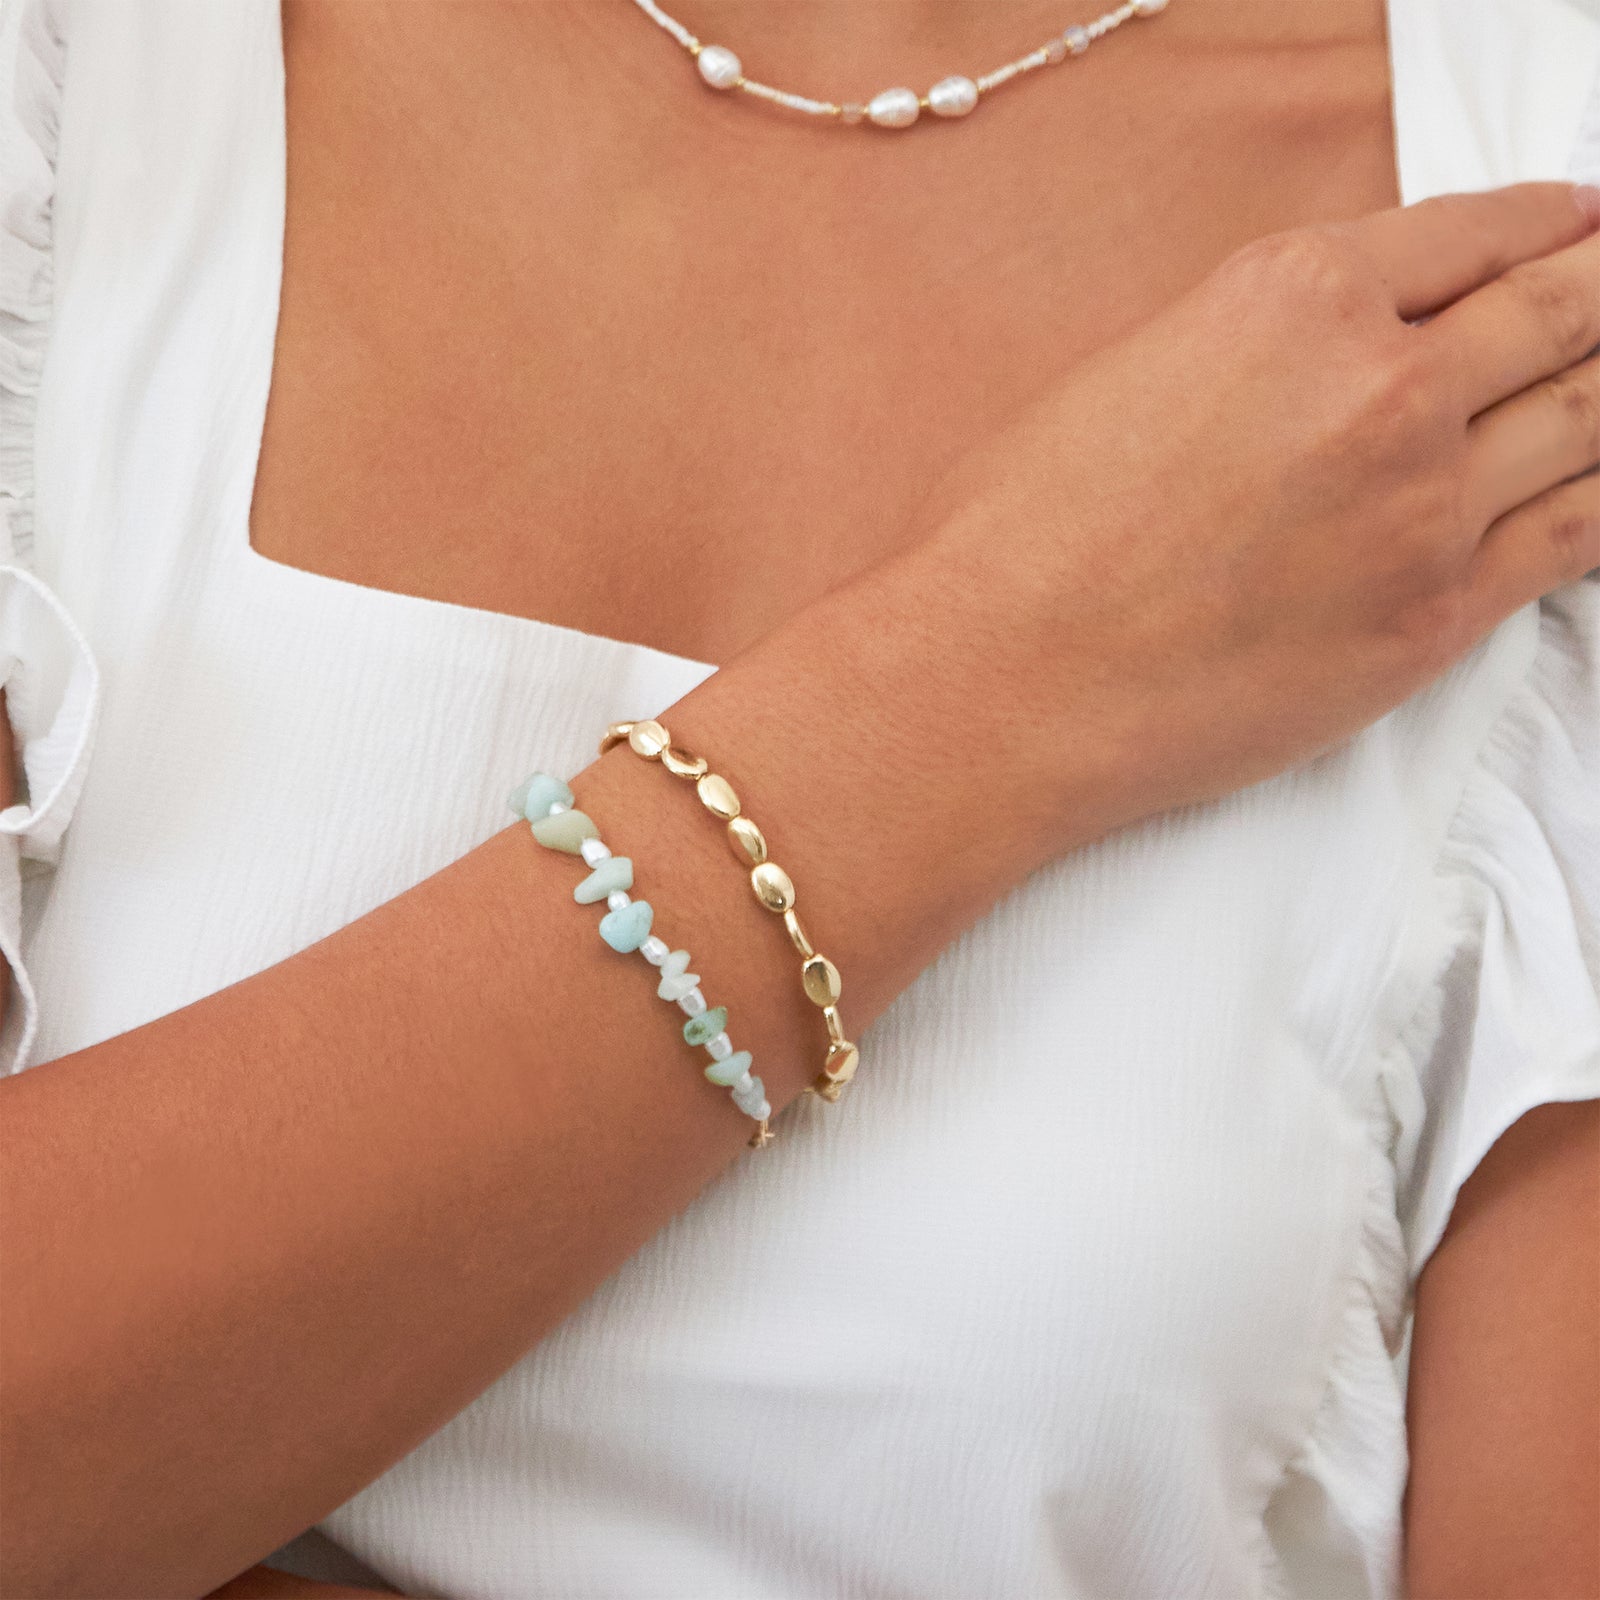 Beachy Beads and Gold Chain Bracelet Set